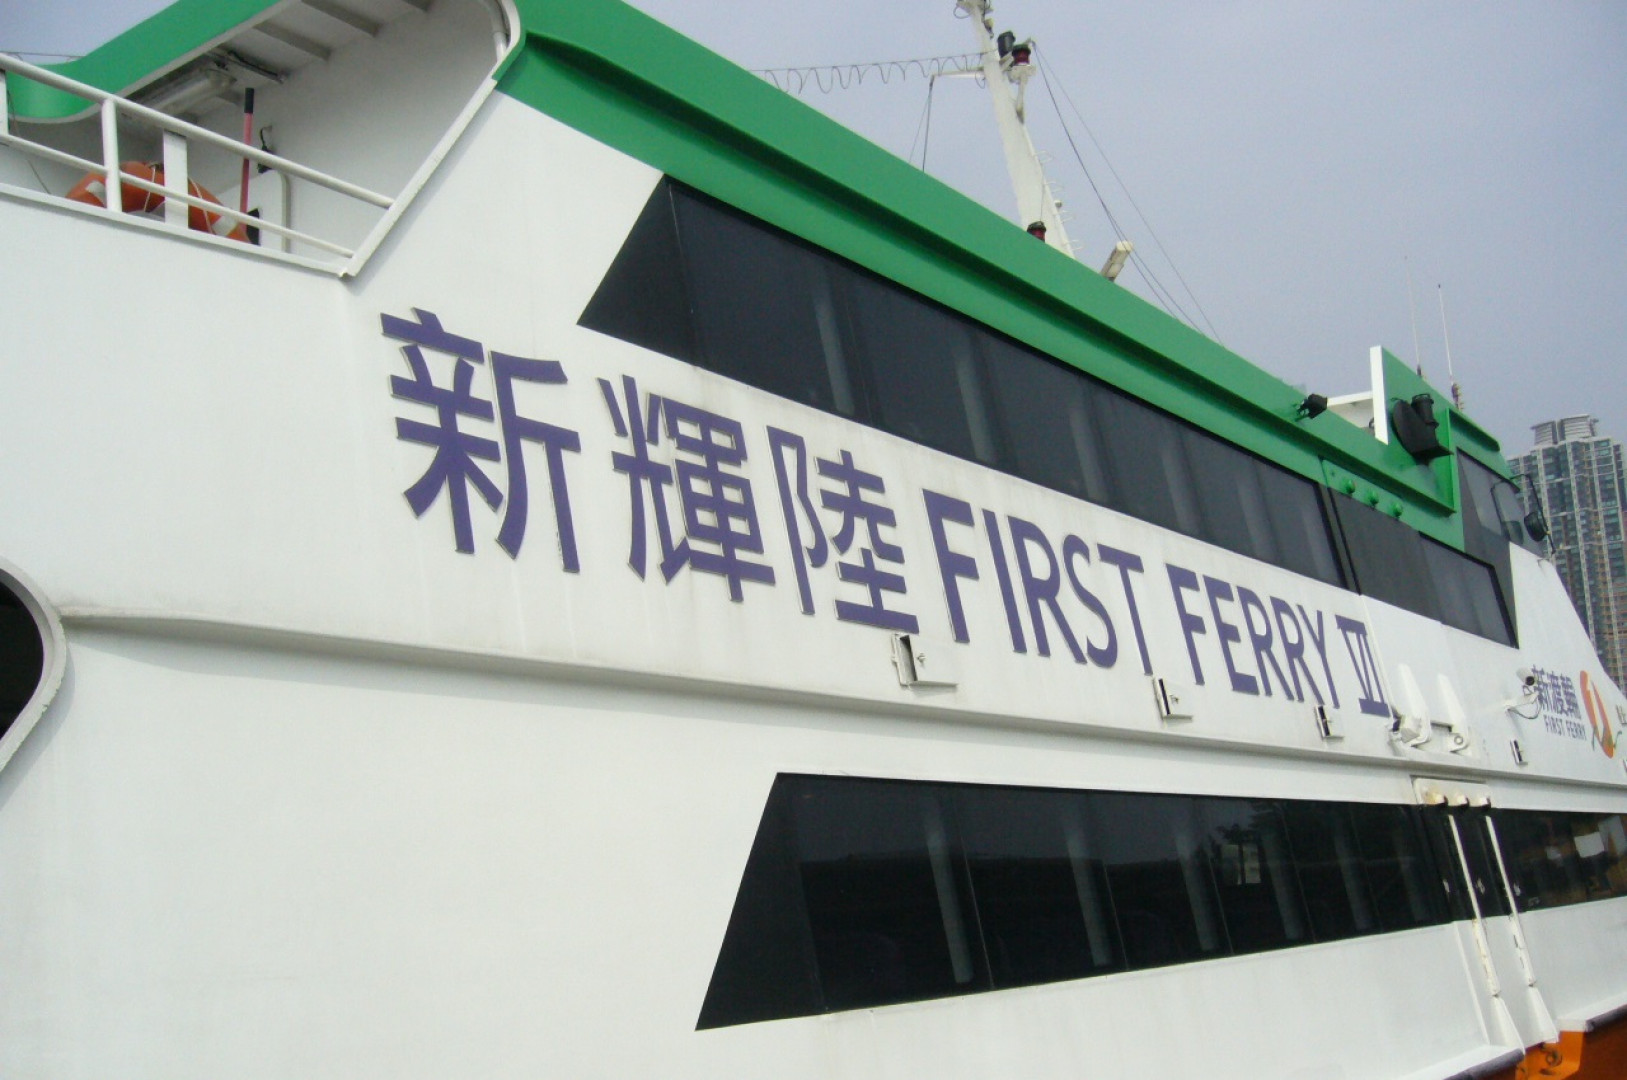 Inauguration of First Ferry VI and First Ferry VII